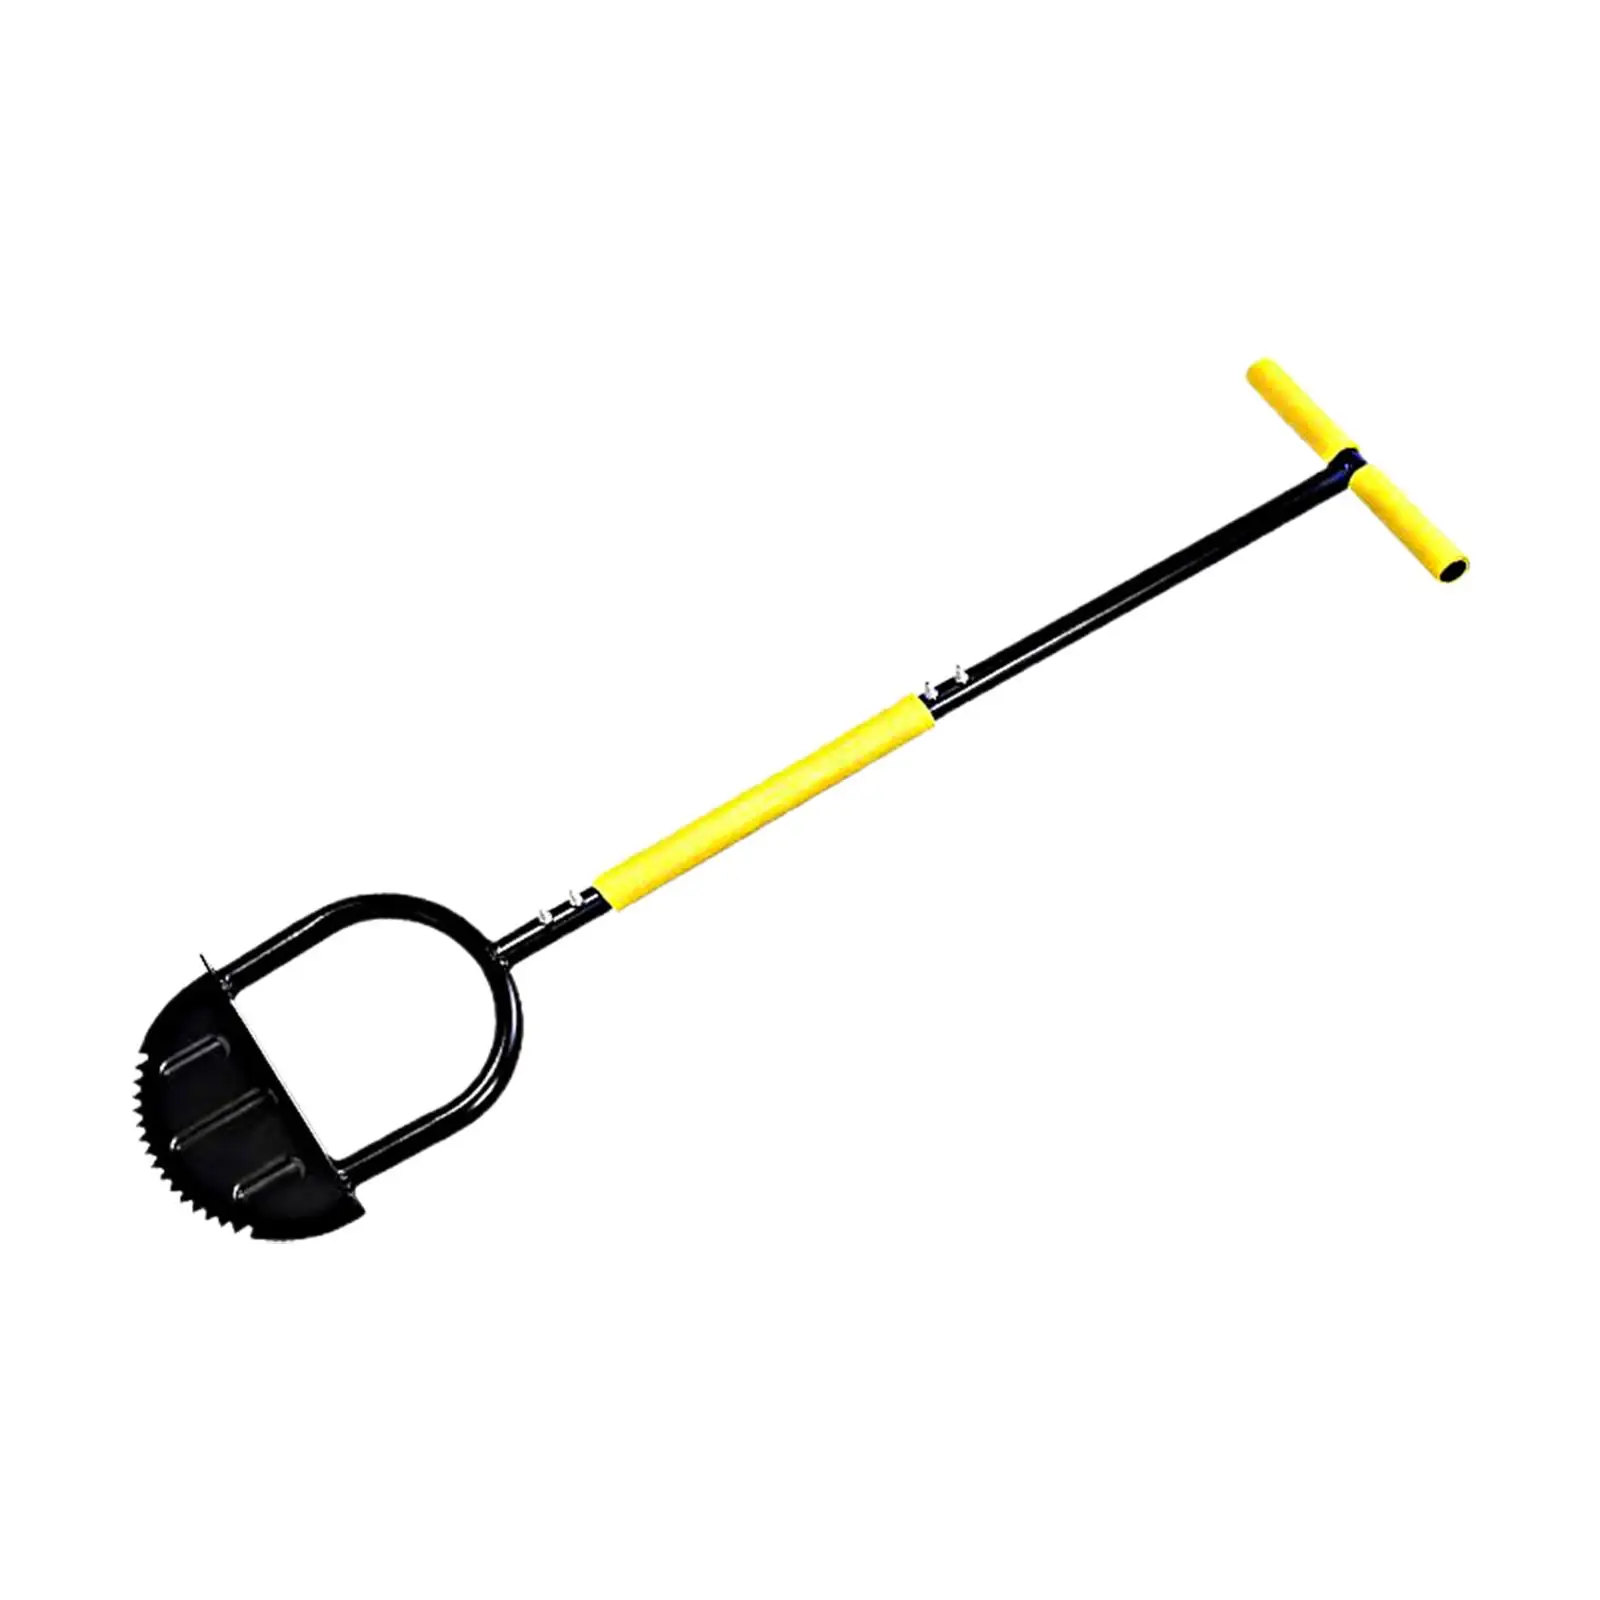 Lawn Edging Tool Ergonomic Handle Manual Edger Lawn Tool for Garden Bed Sidewalk Garden Flower Beds Cleaning Edges Landscapers